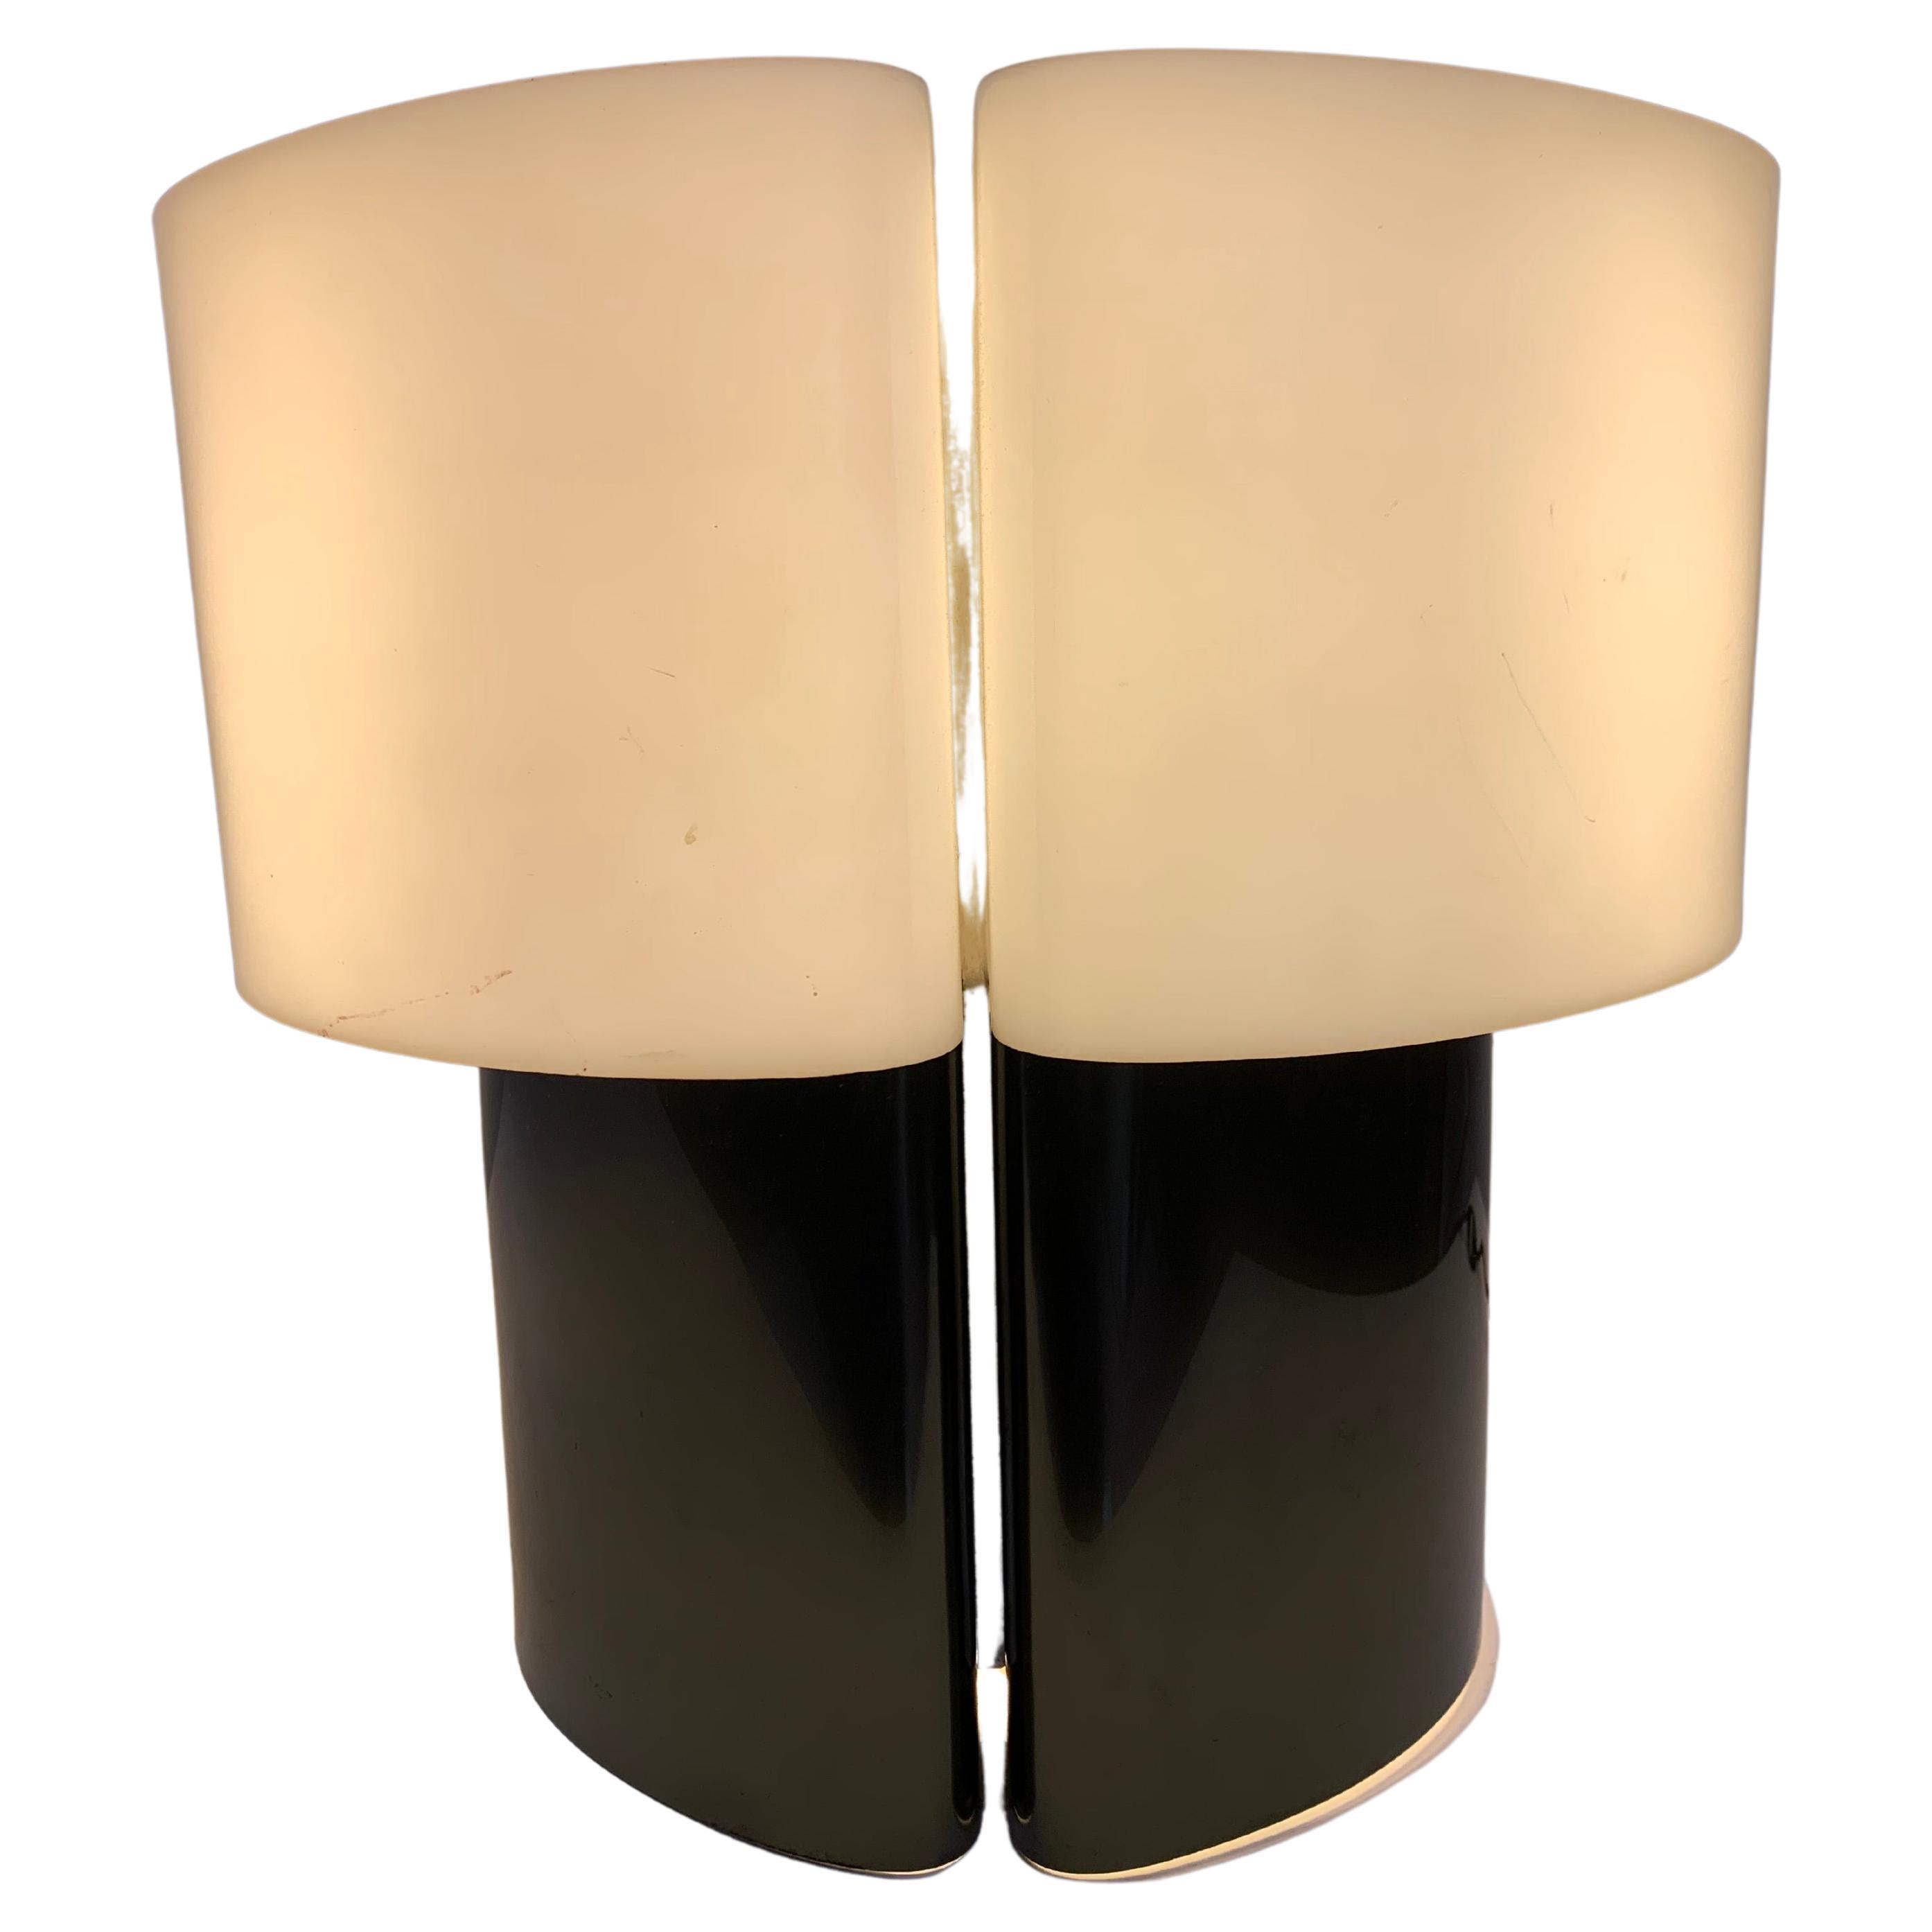 The rare “Cyclade” table lamps signed by danielle Quarante comes with a golden structure and a white shade in a shape of half-moon from both symmetrical sides made from PMMA.
Danielle Quarante is a French Postwar & Contemporary artist who was born